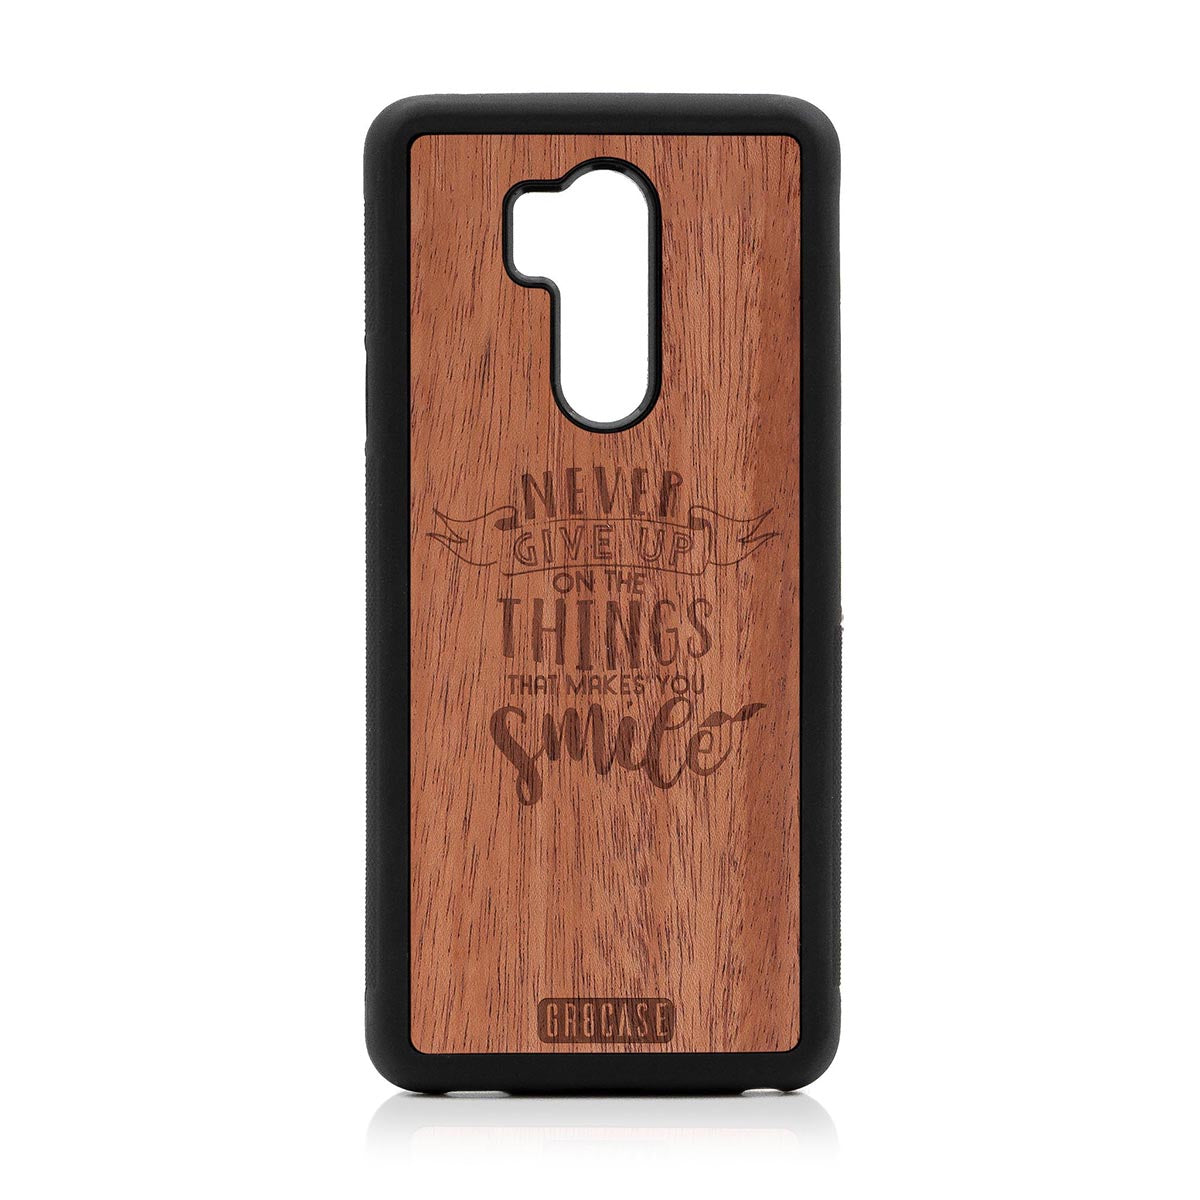 Never Give Up On The Things That Makes You Smile Design Wood Case LG G7 ThinQ by GR8CASE